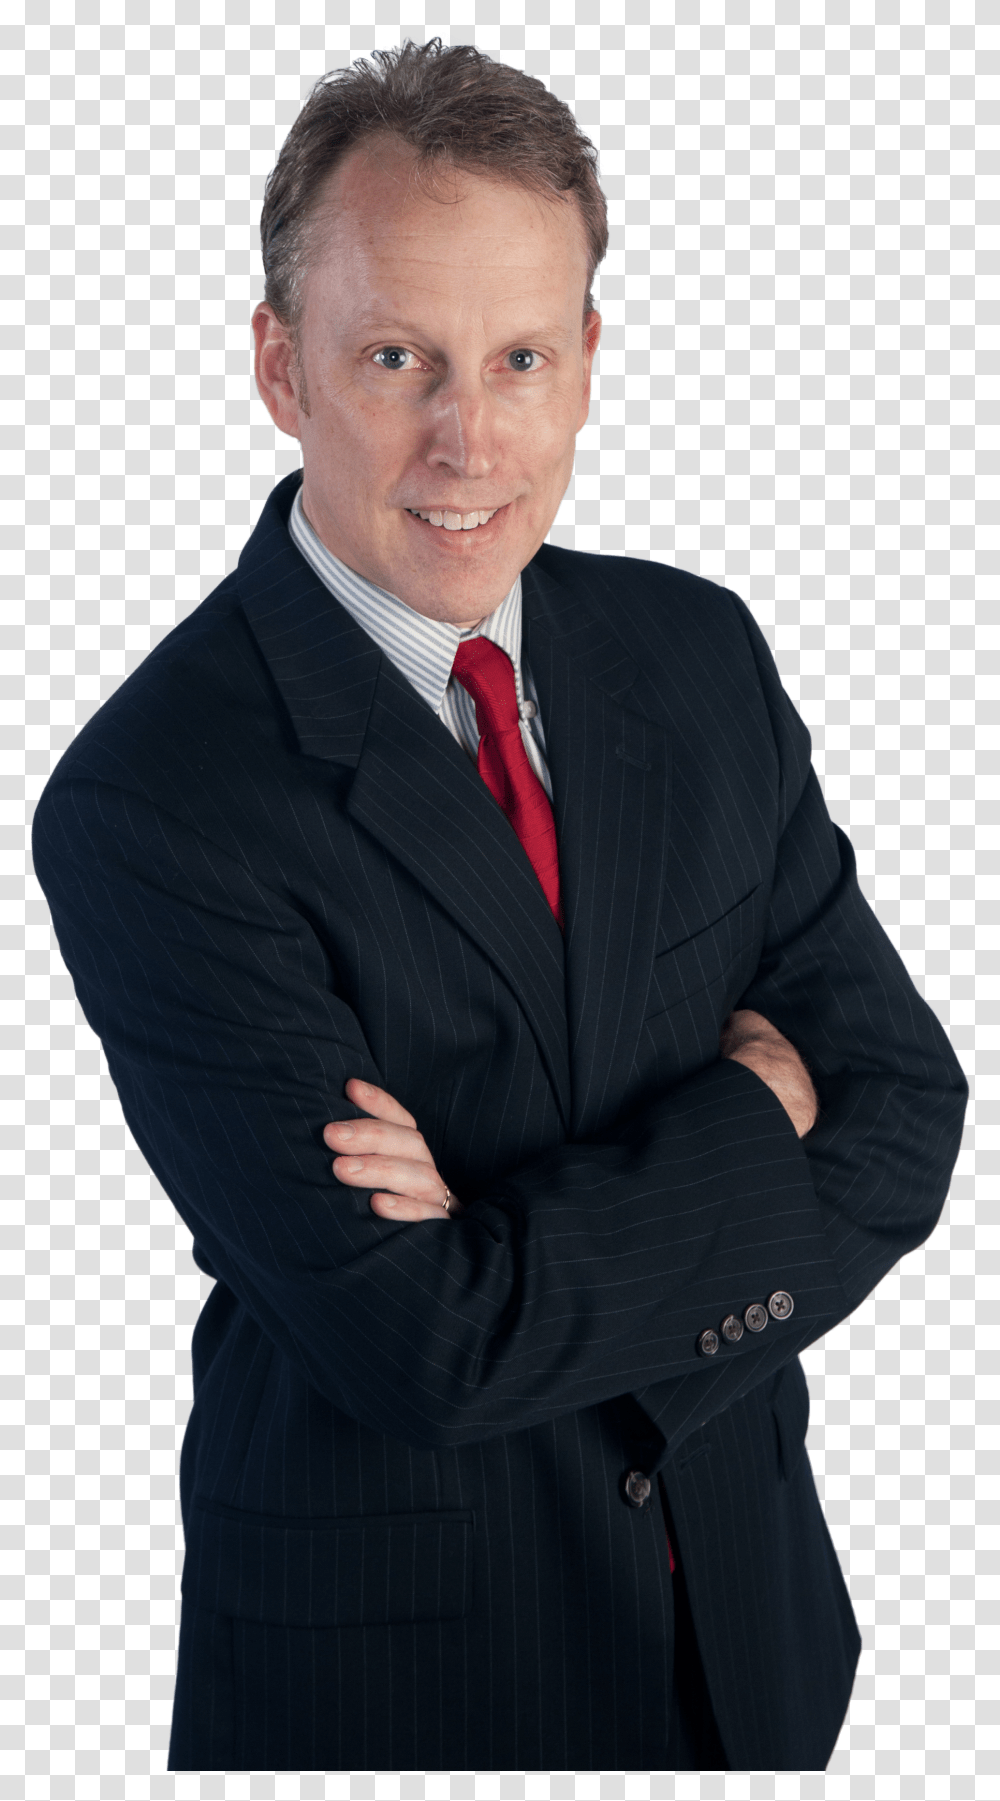 Suit Image Stock Photo Of Man Background Transparent Png